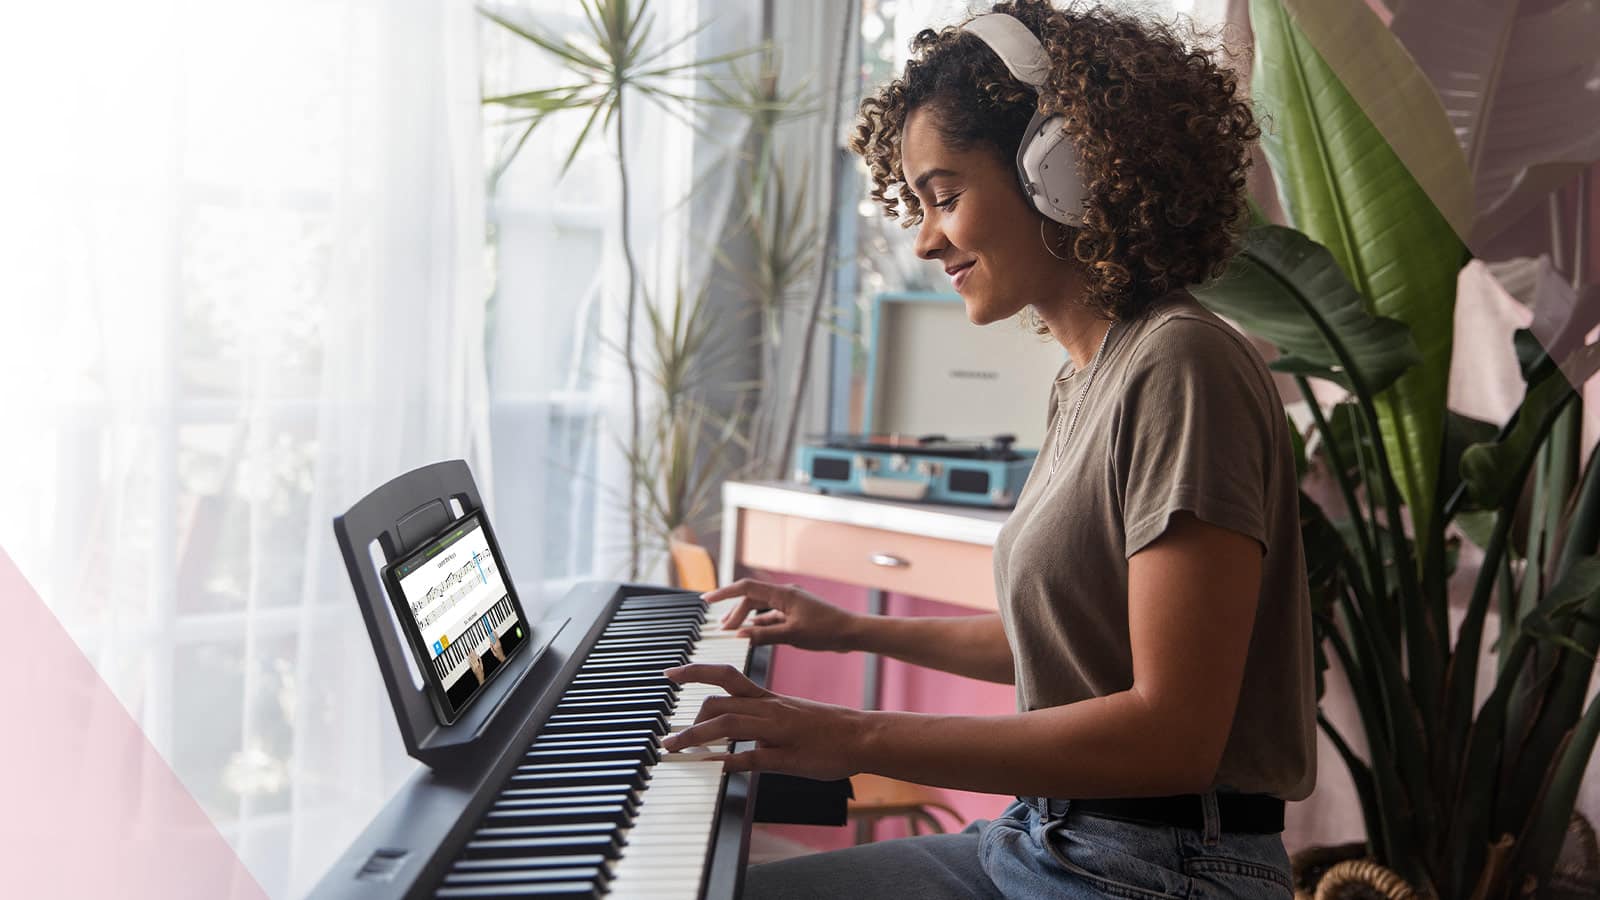 Free Roland Apps and Piano Lessons via #RolandAtHome